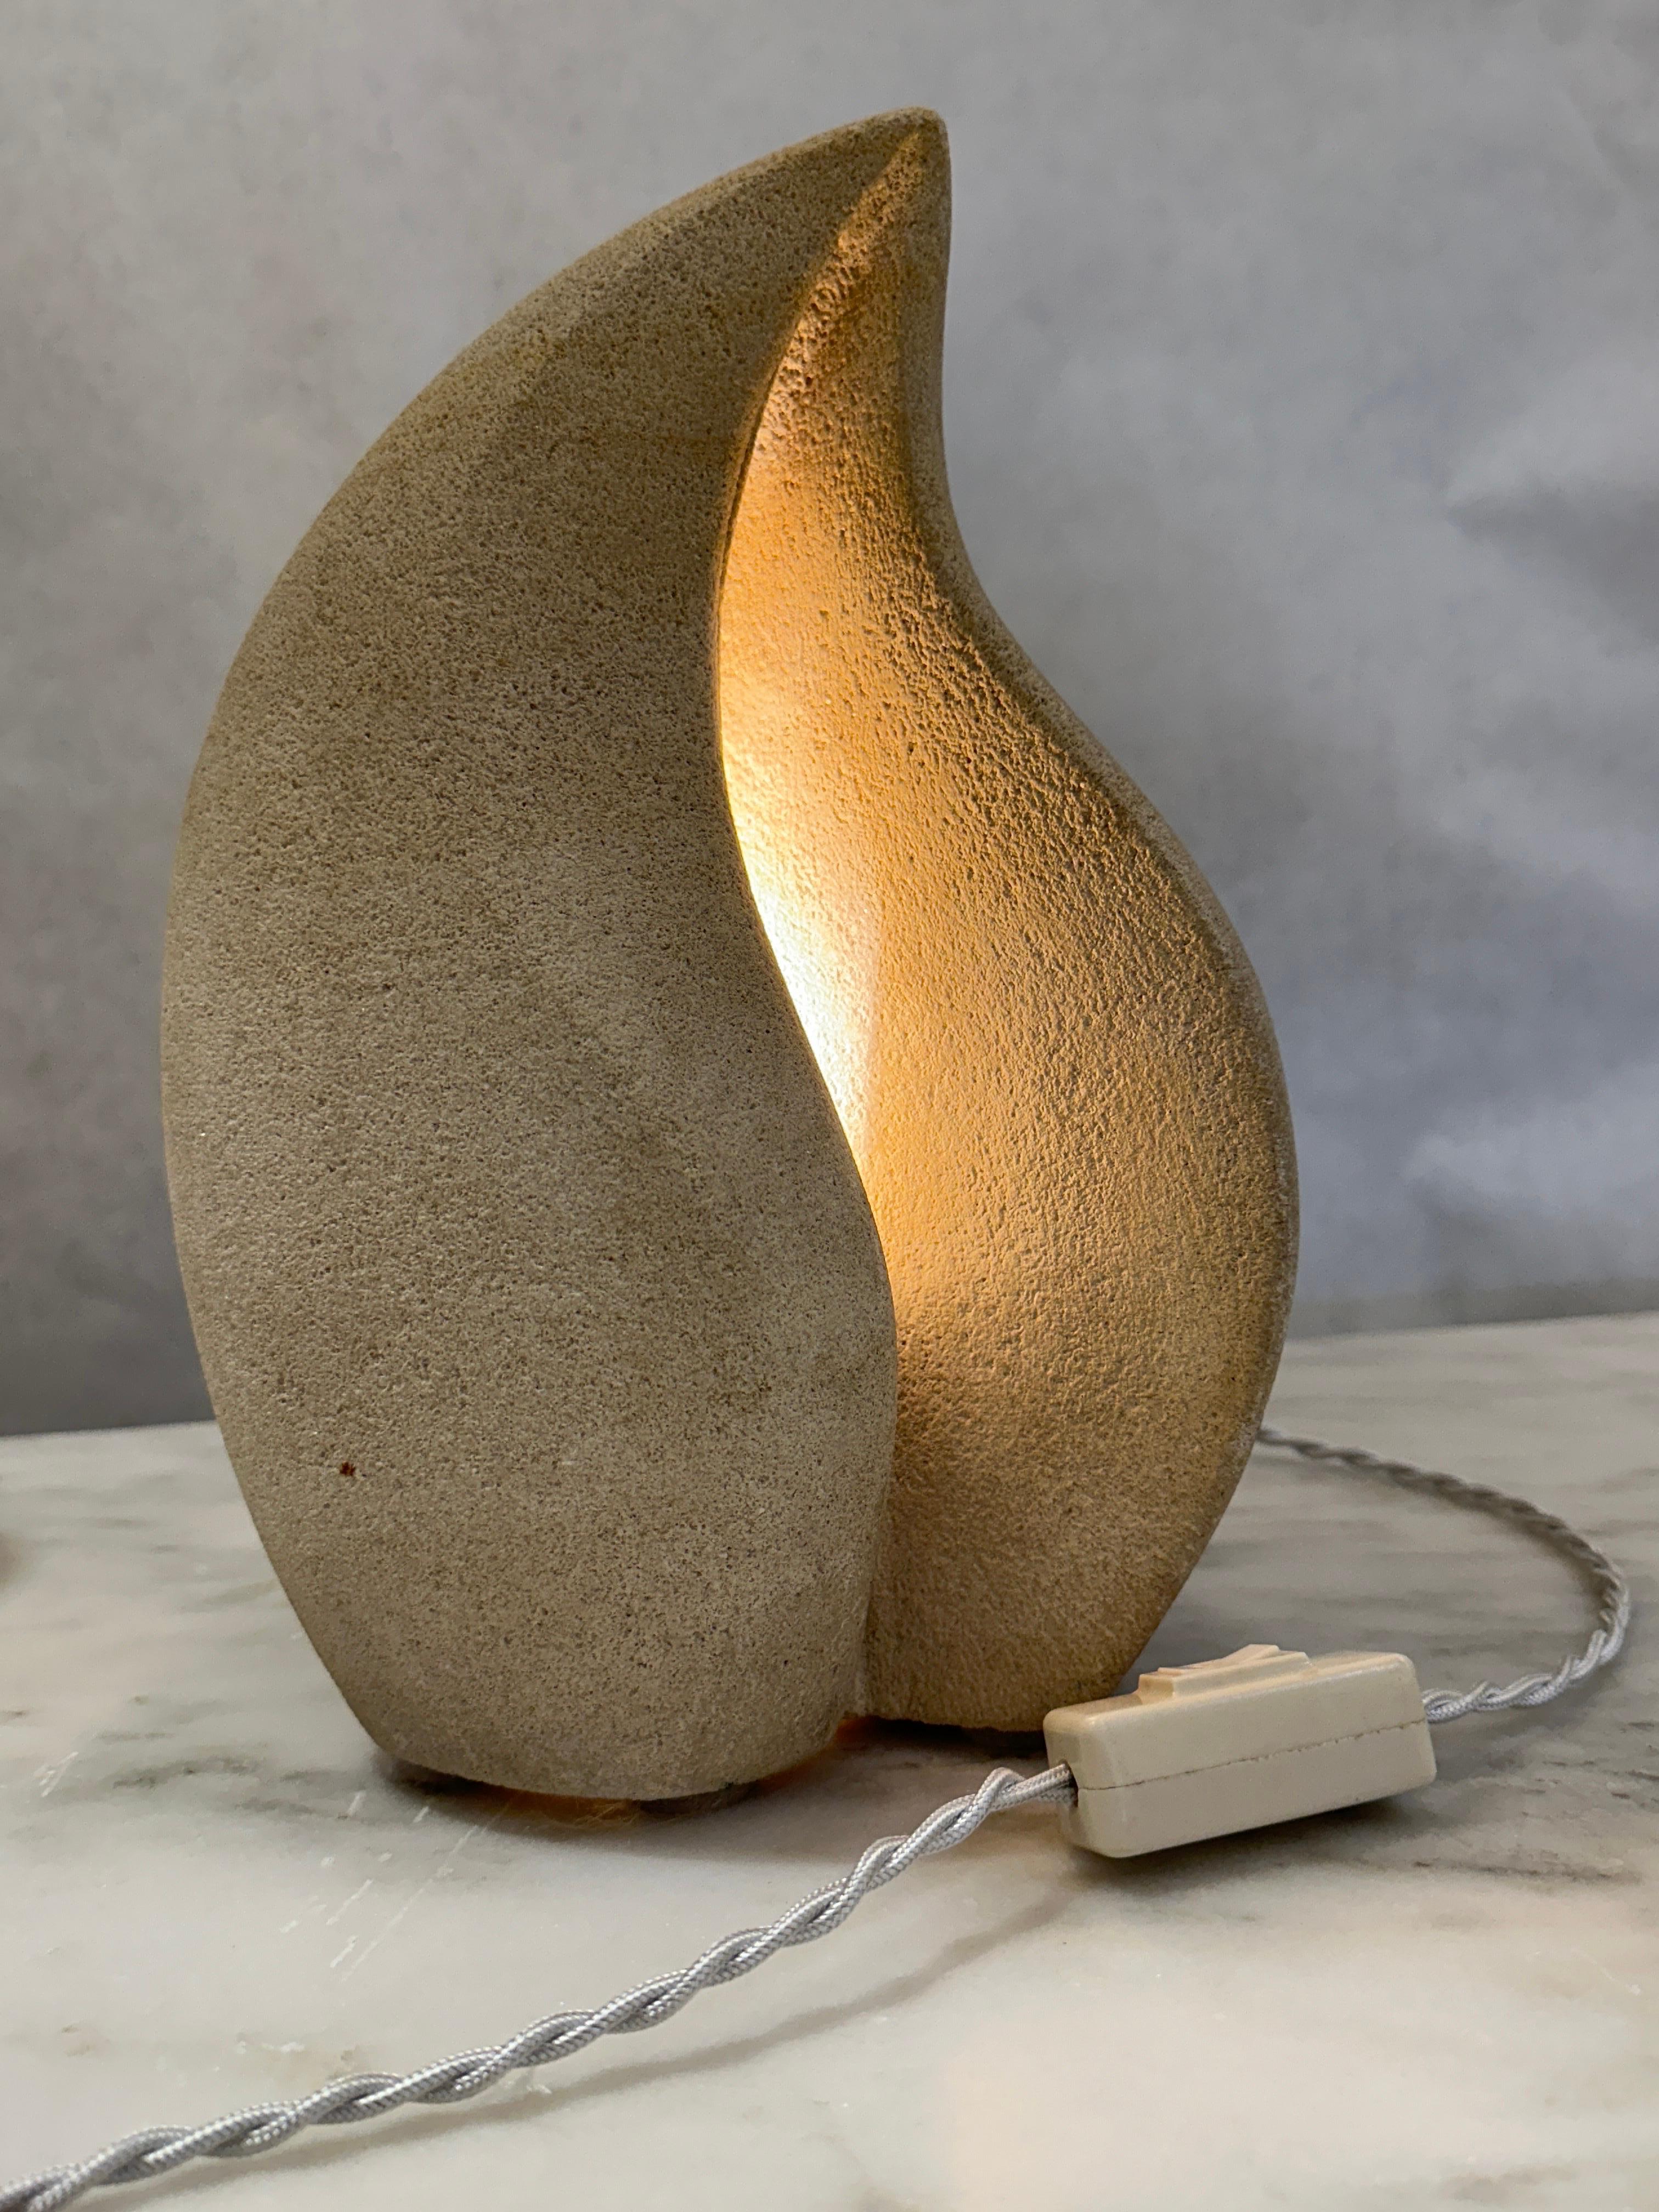 This is an extremely sculptural stone table lamp by French sculptor, Arsene Galisson.  He creates small architectural lamps and objects inhabited by a soft light, a constant presence. Signed by the artist, the lamps are made from Chauvigny stone. 